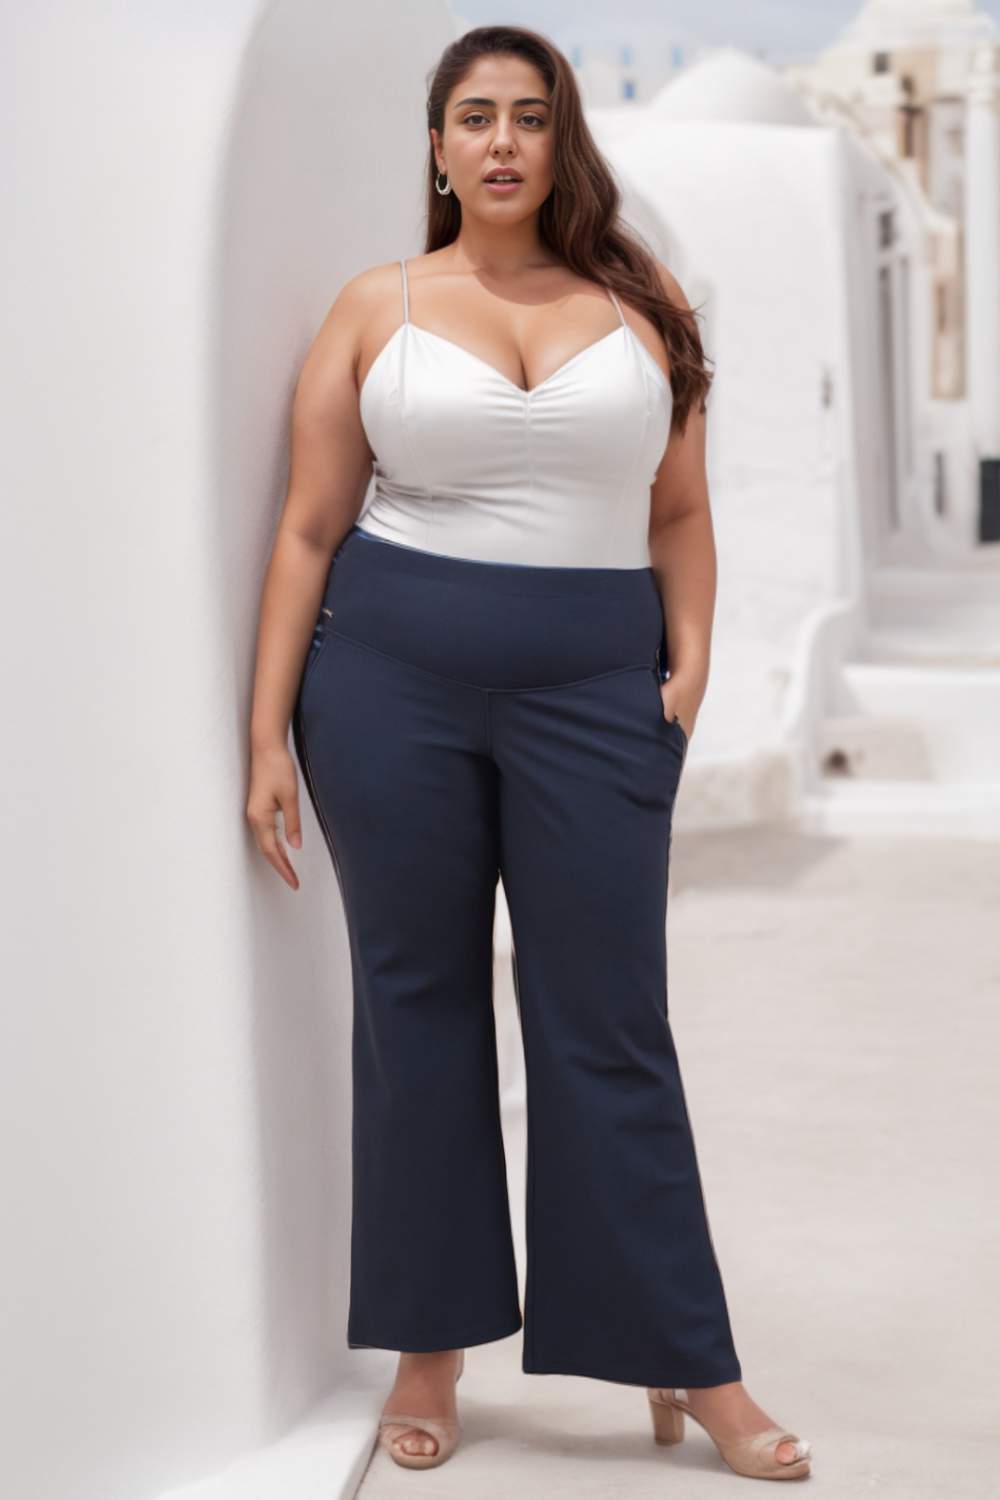 Amydus Plus Size Fashion on Instagram: High waist, narrow fit, and firmly  shaped belly and hips - need we say more about why you need our Navy Crease  Seam tummy tucker pants?